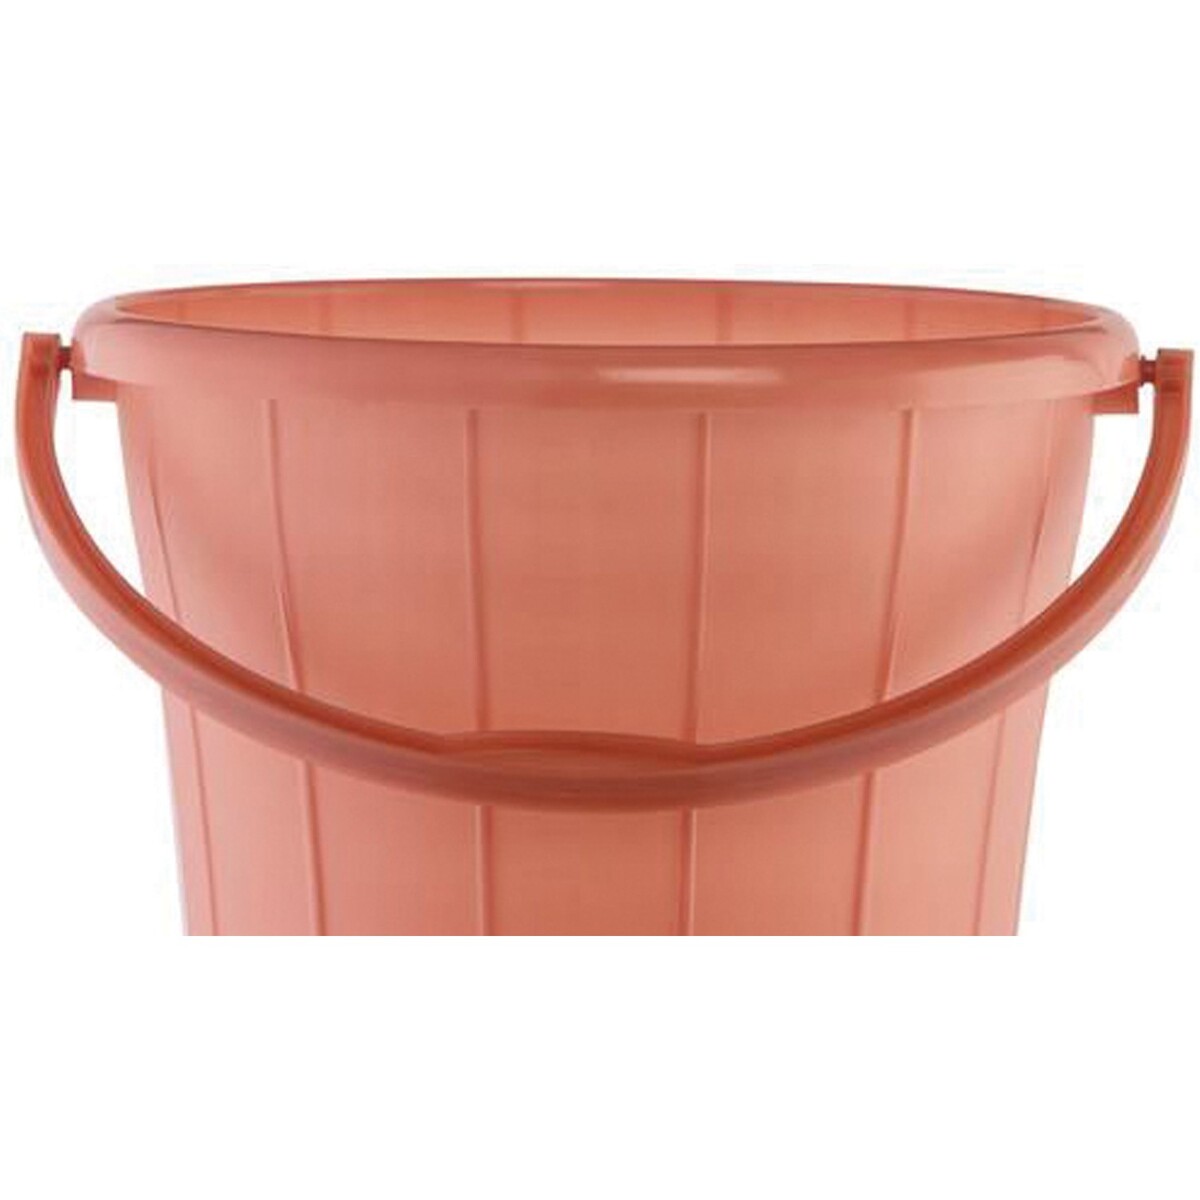 Polyset Bucket Frosty 18 Tinted Assorted Colour